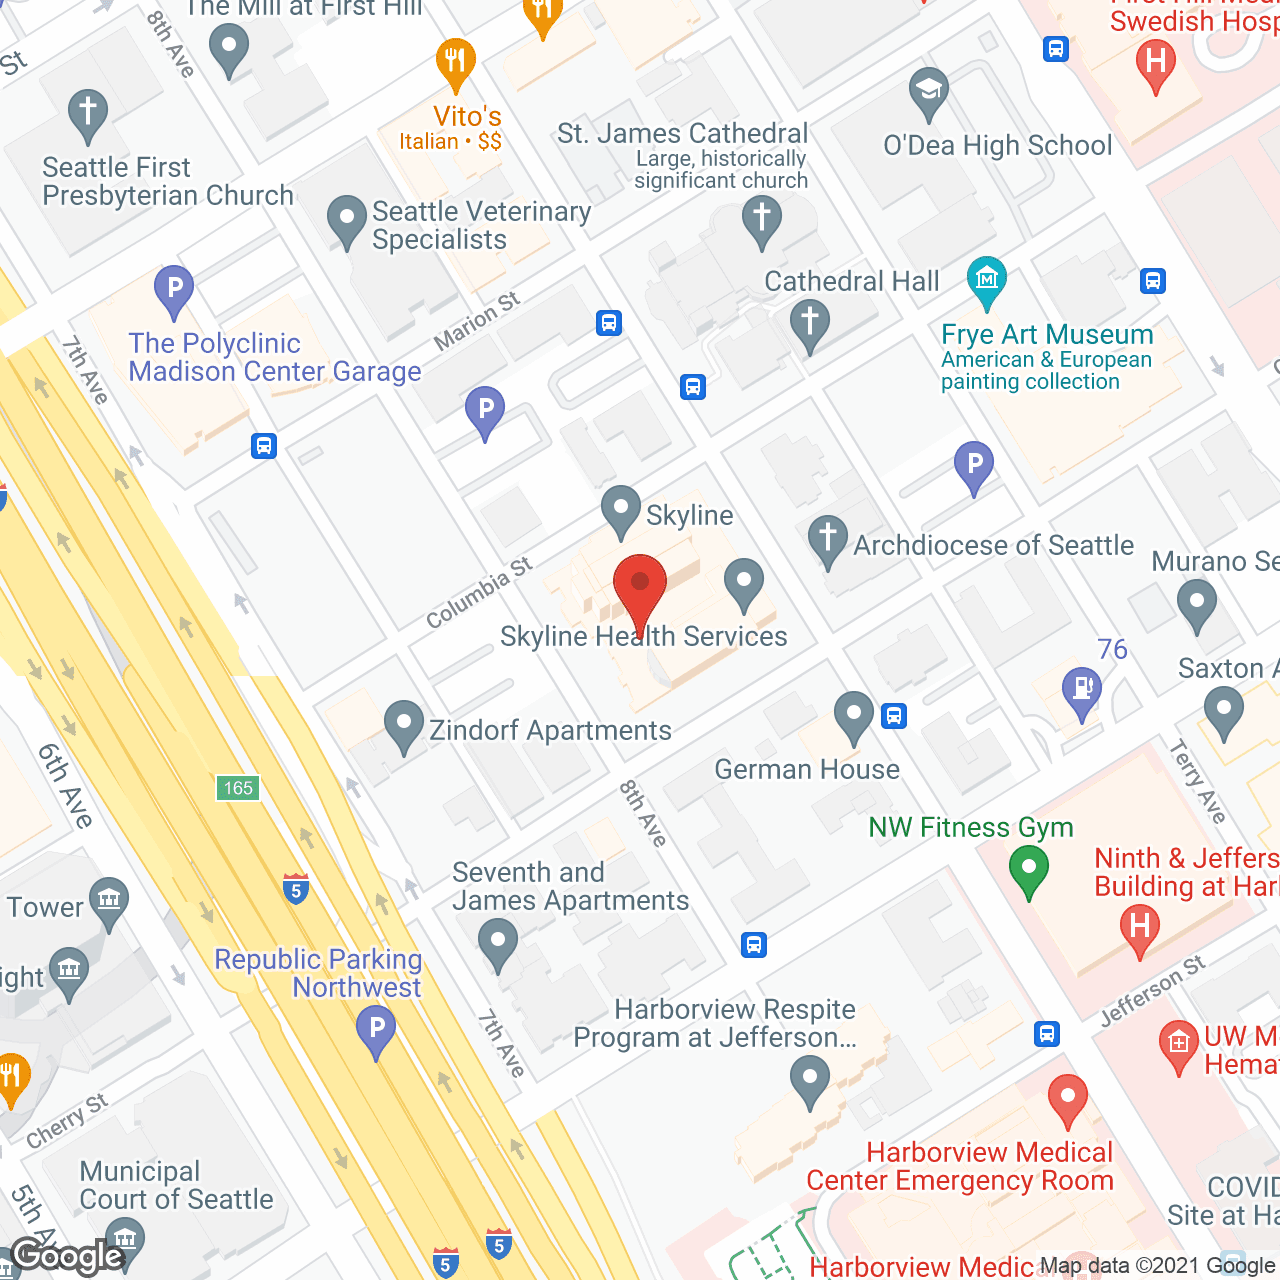 Skyline Health Services in google map